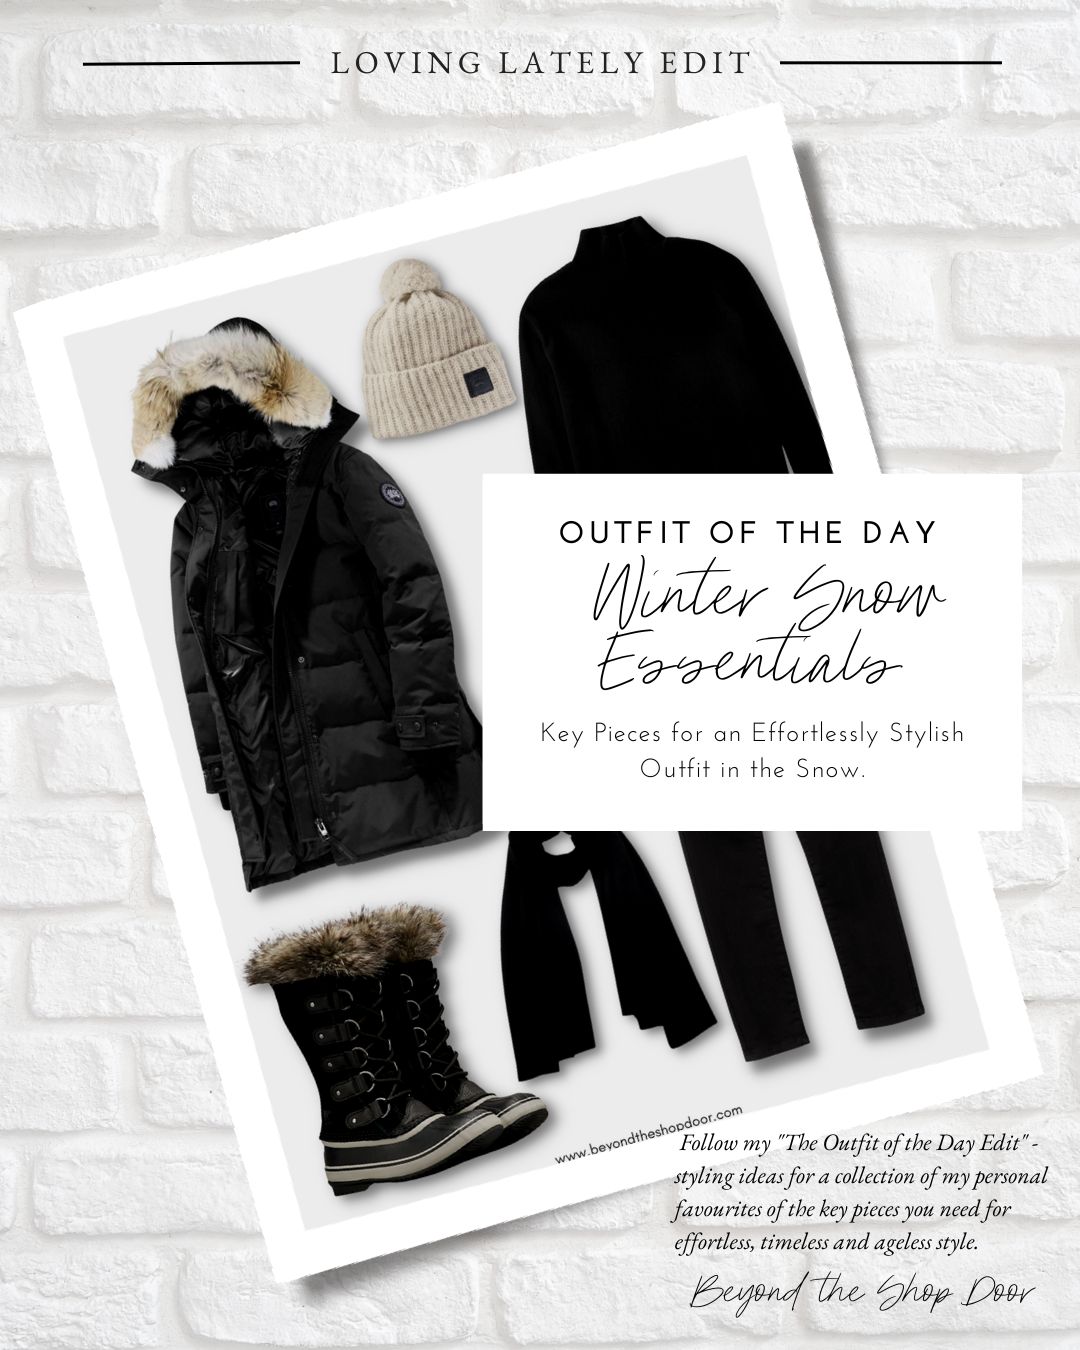 Winter Snow Outfit Essentials - Loving Lately Edit - Beyond The